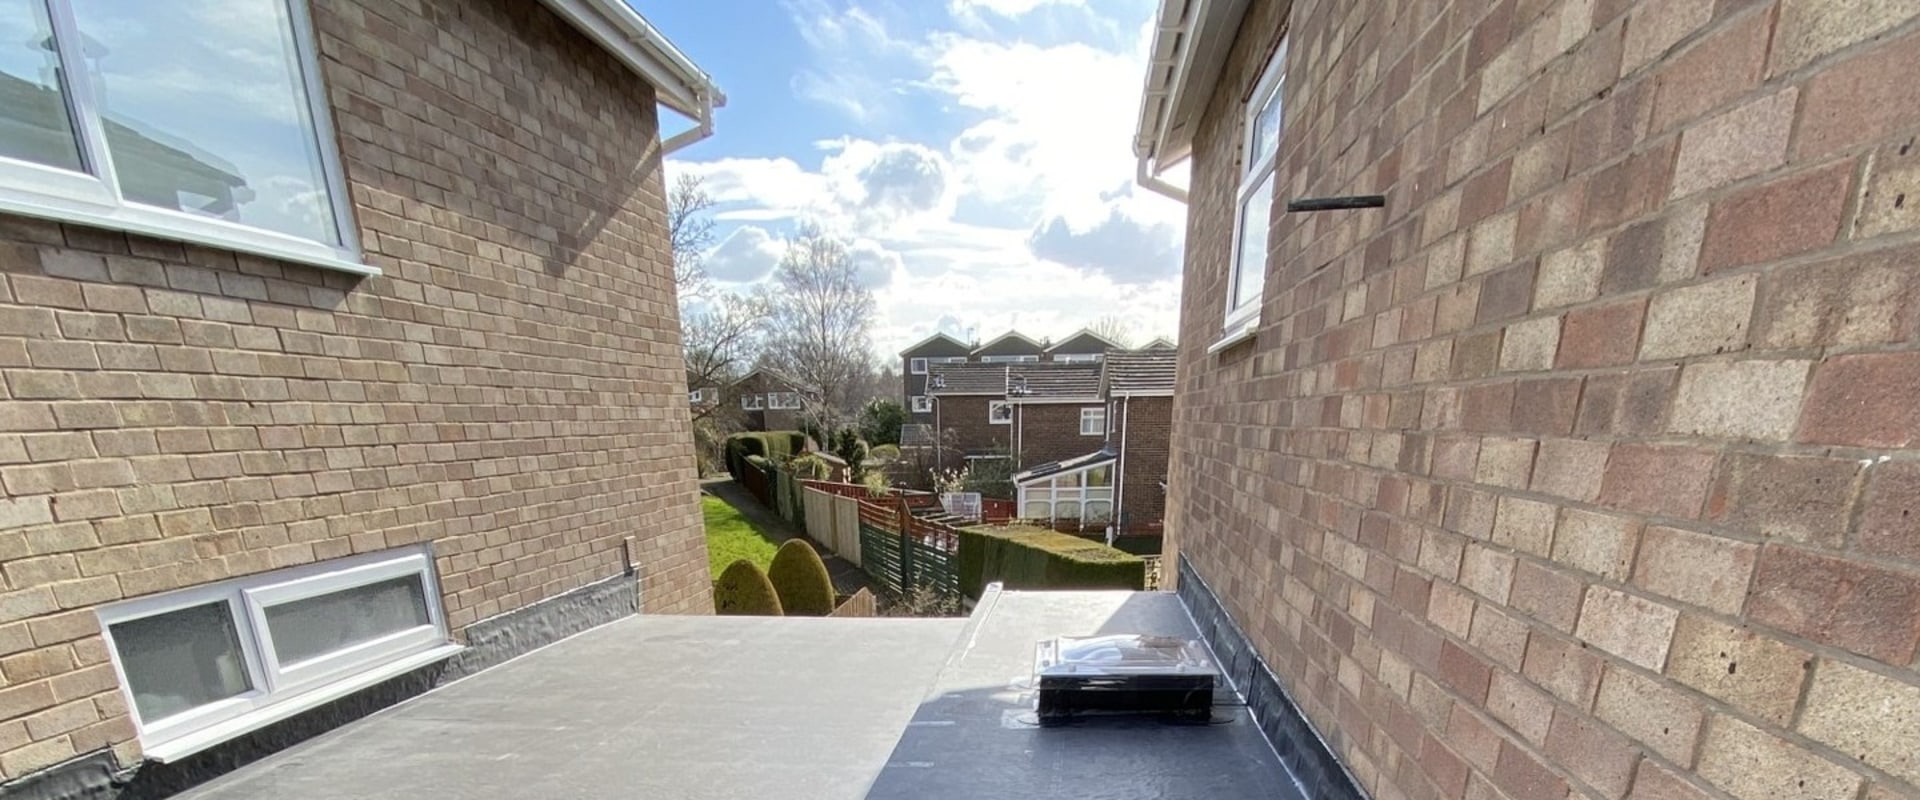 Understanding EPDM Roofing Systems for Your Home or Business